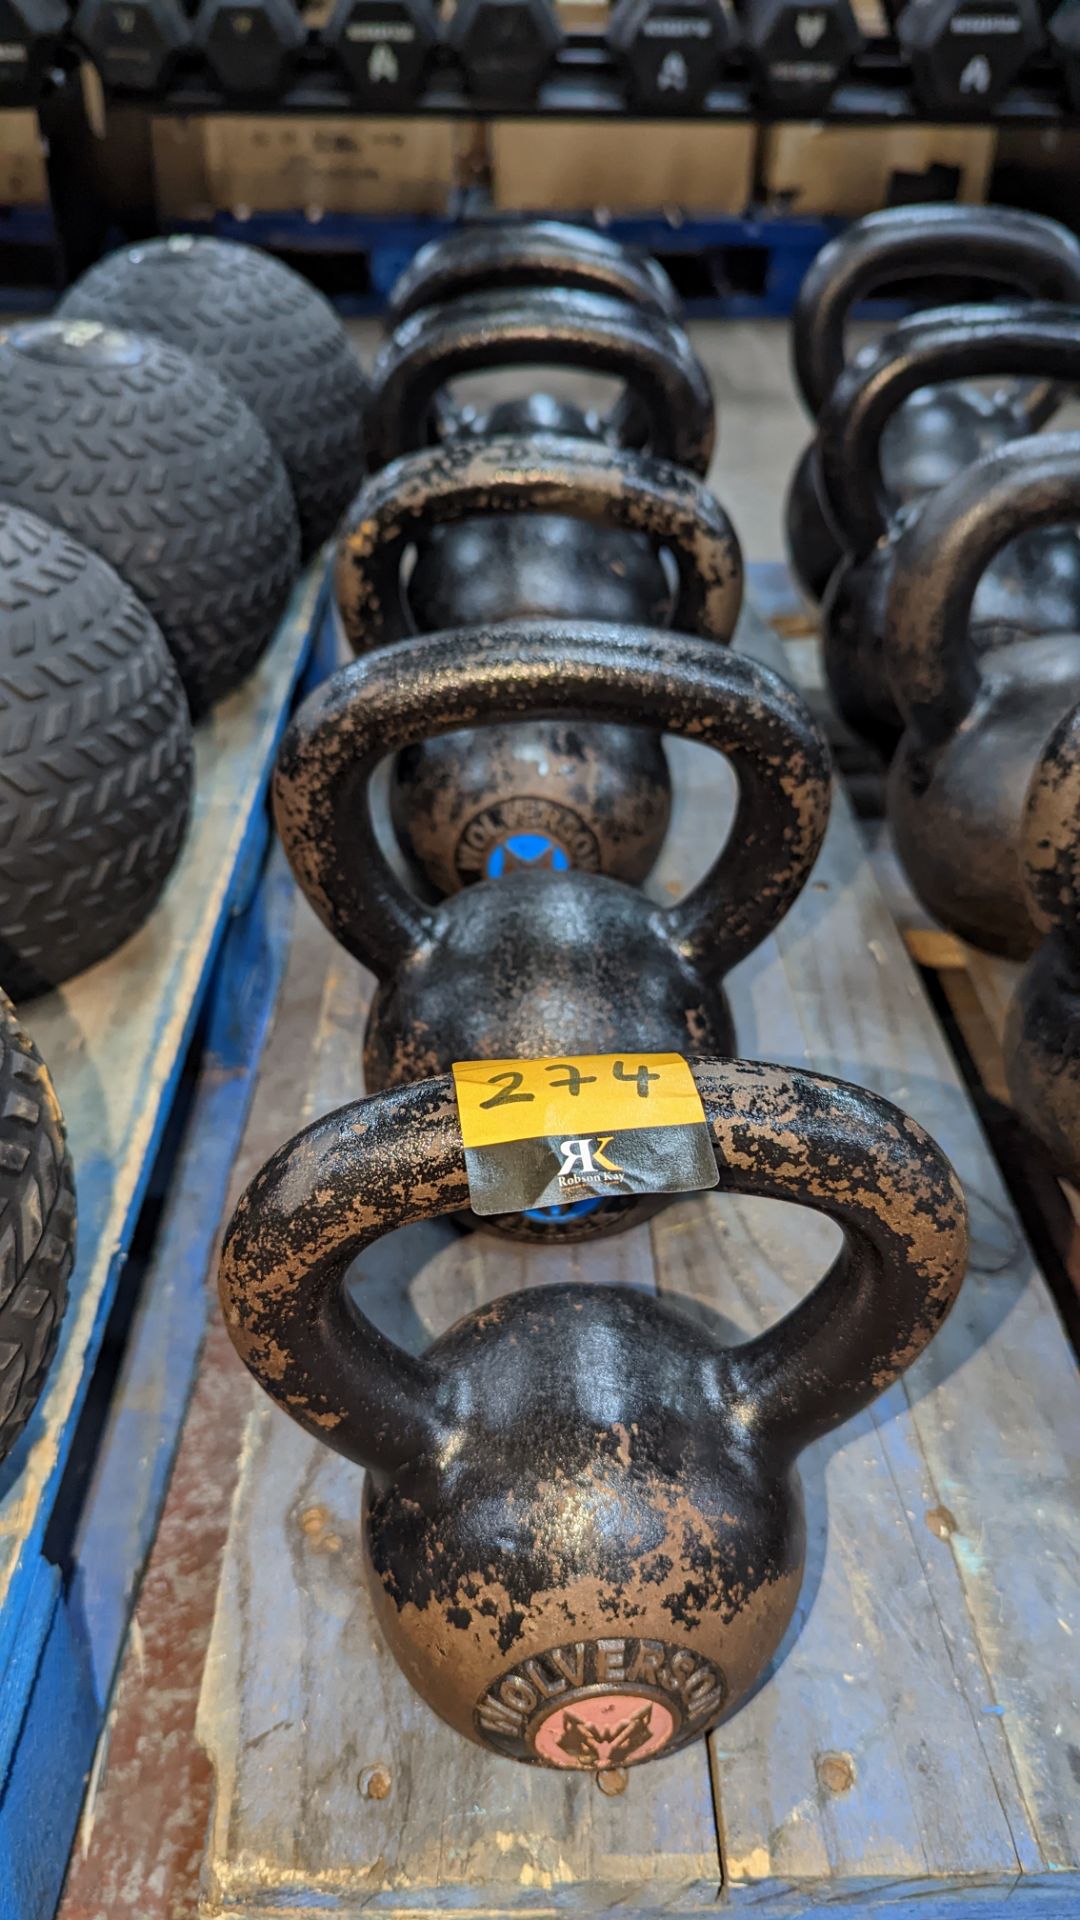 5 off Wolverson kettlebells - this lot comprises 2 x 20kg, 2 x 12kg and 1 x 8kg - Image 2 of 10